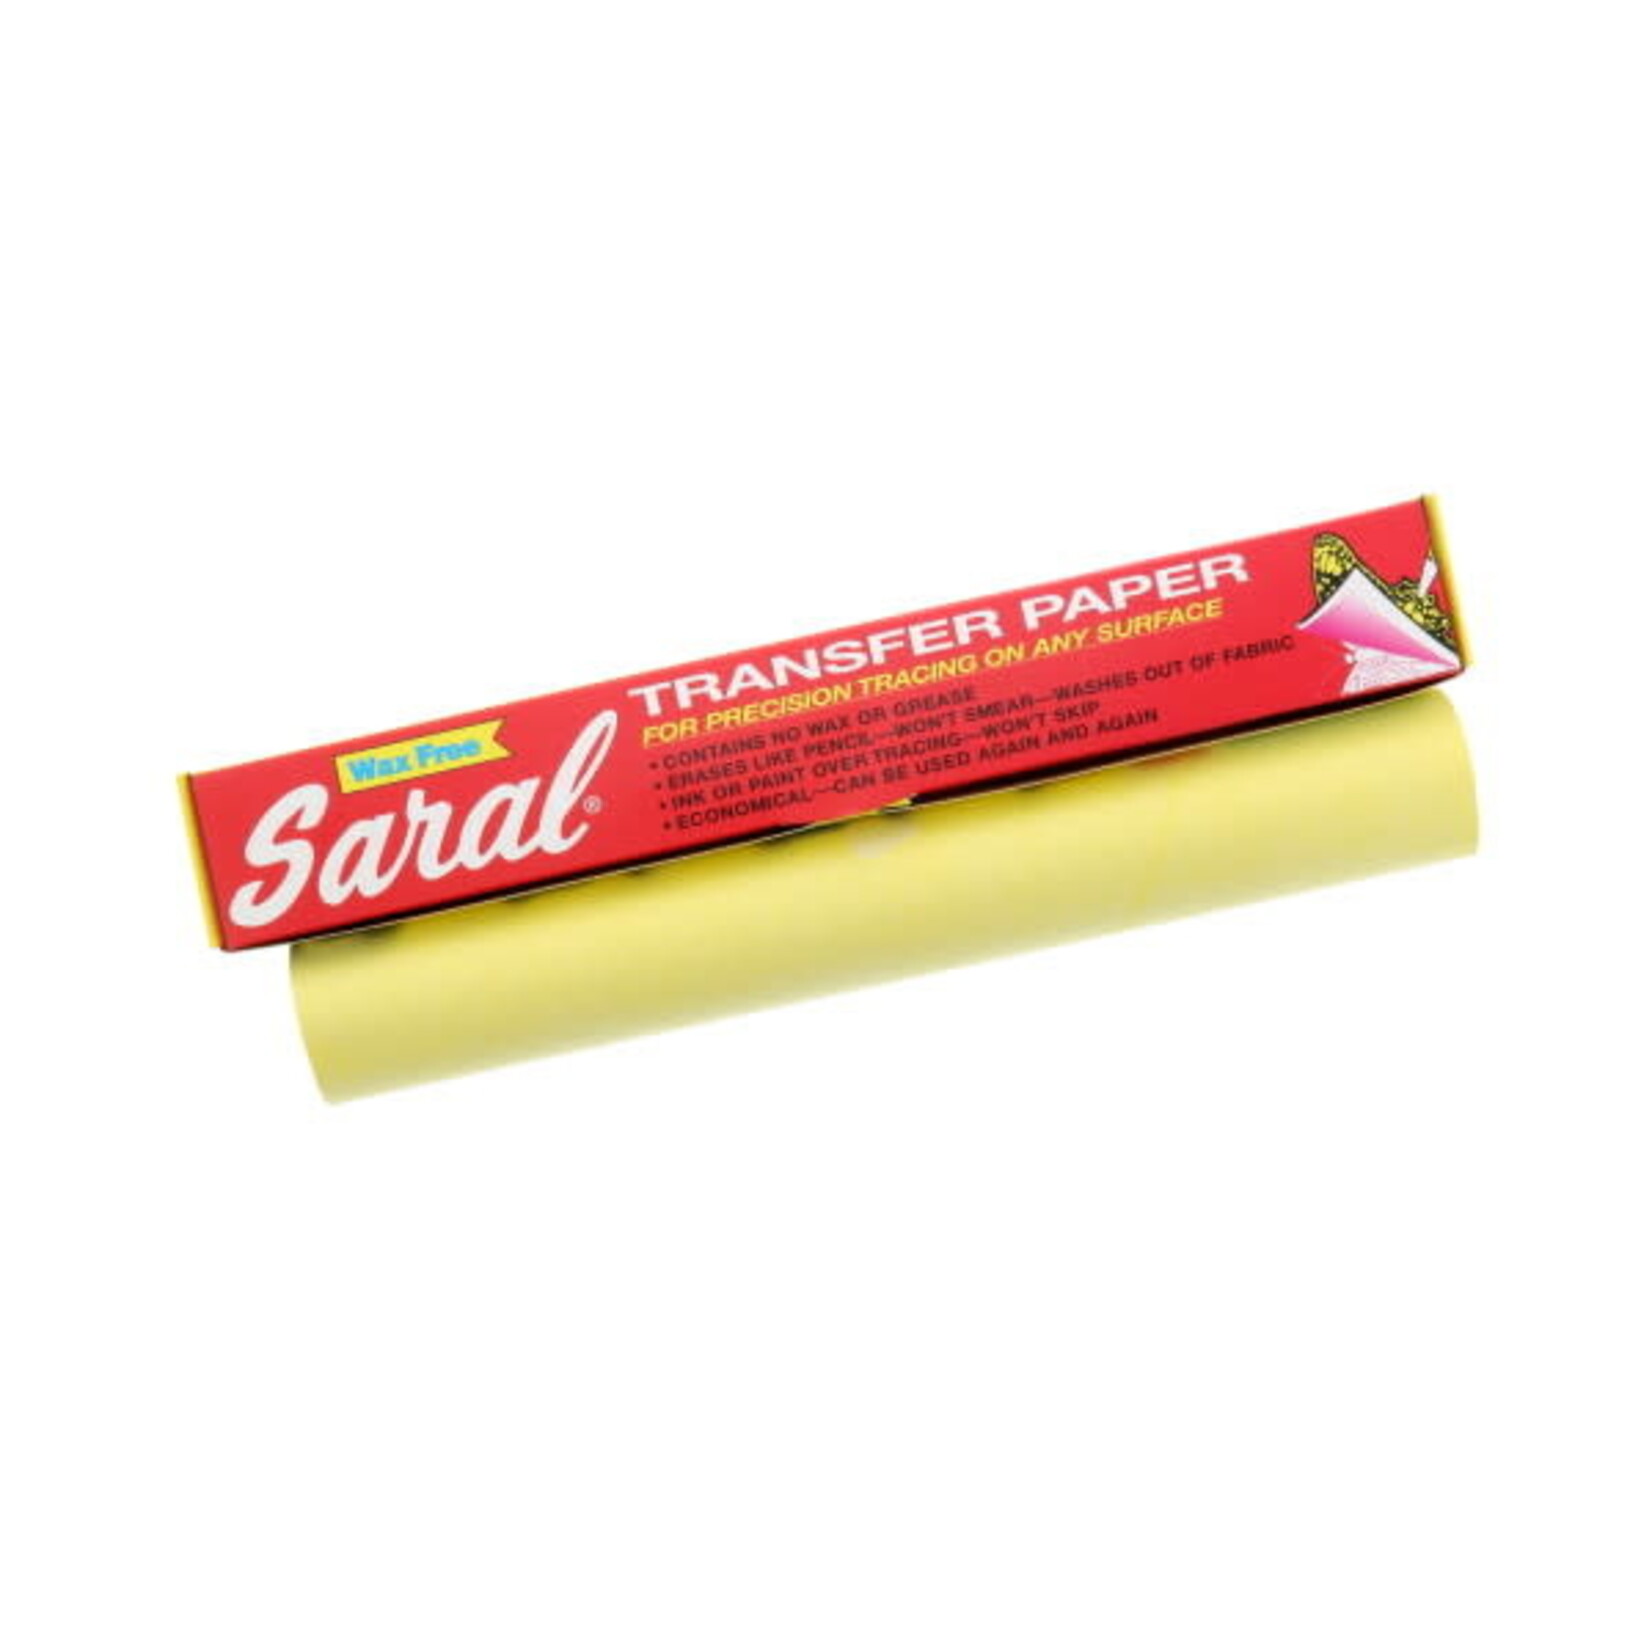 Saral Saral Paper Yellow 12 Ft